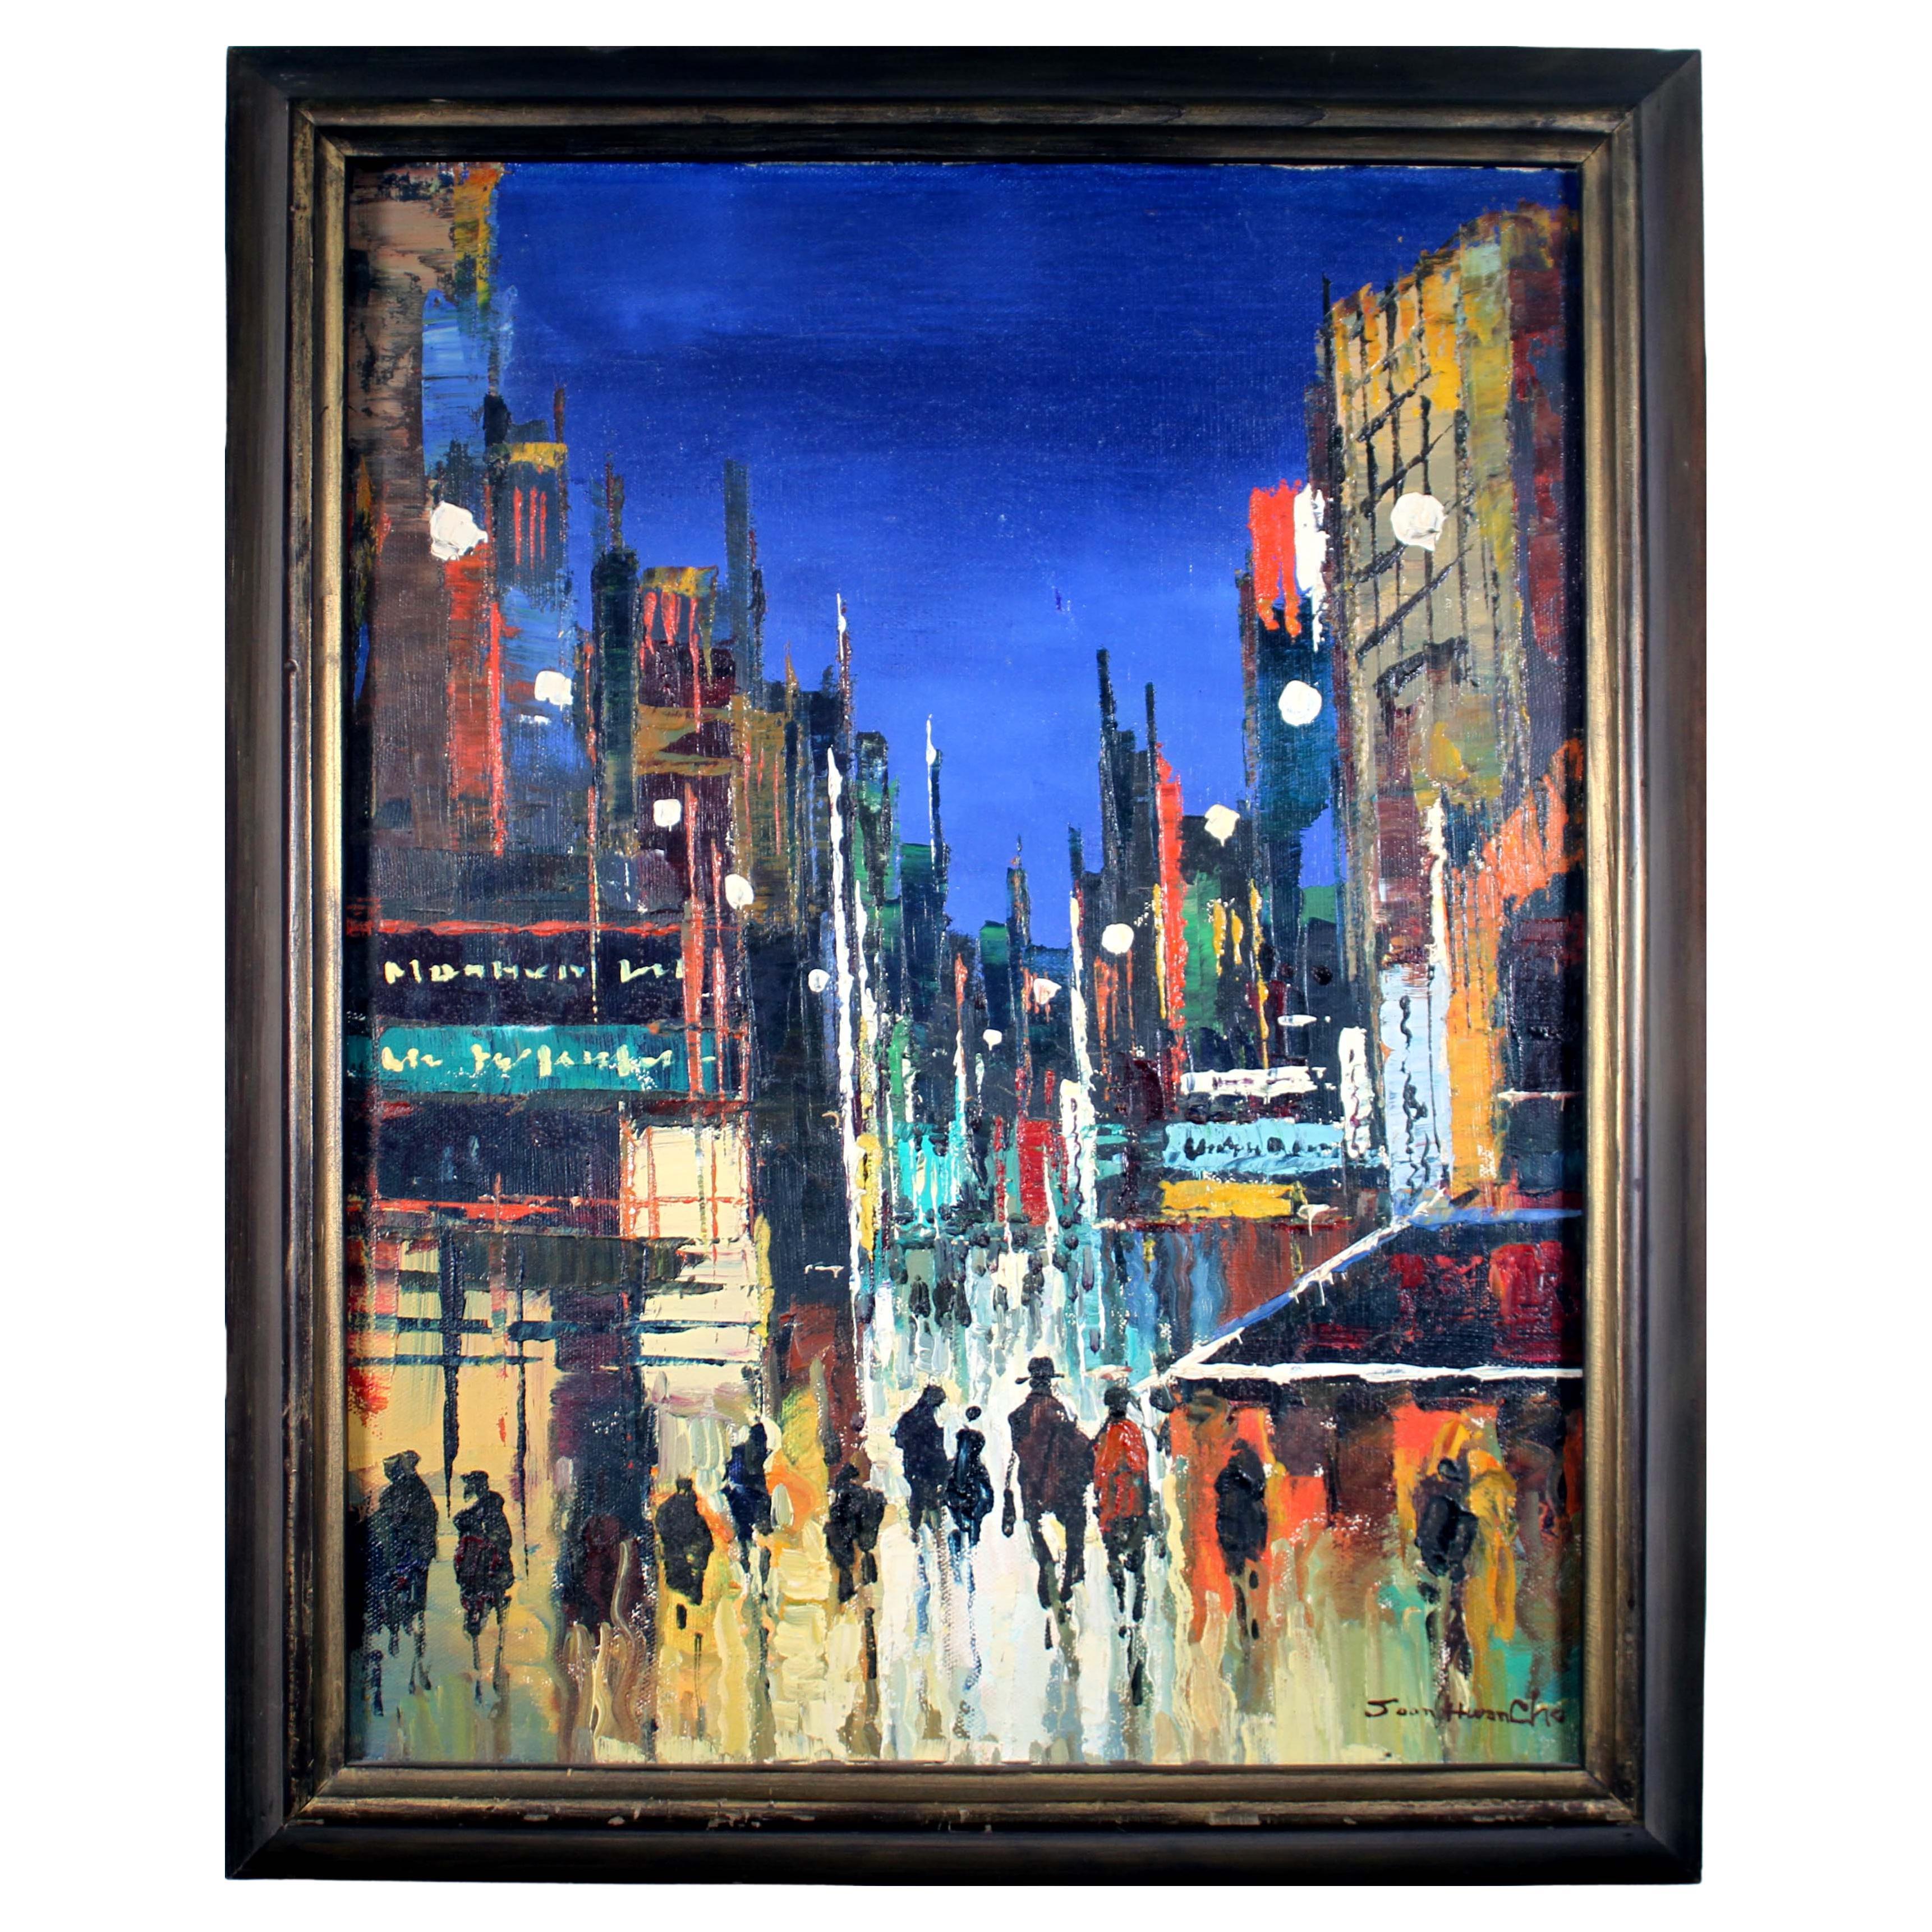 Mid-Century Modern Nightscape Oil Painting on Canvas Framed Signed Joan Hwan Cho